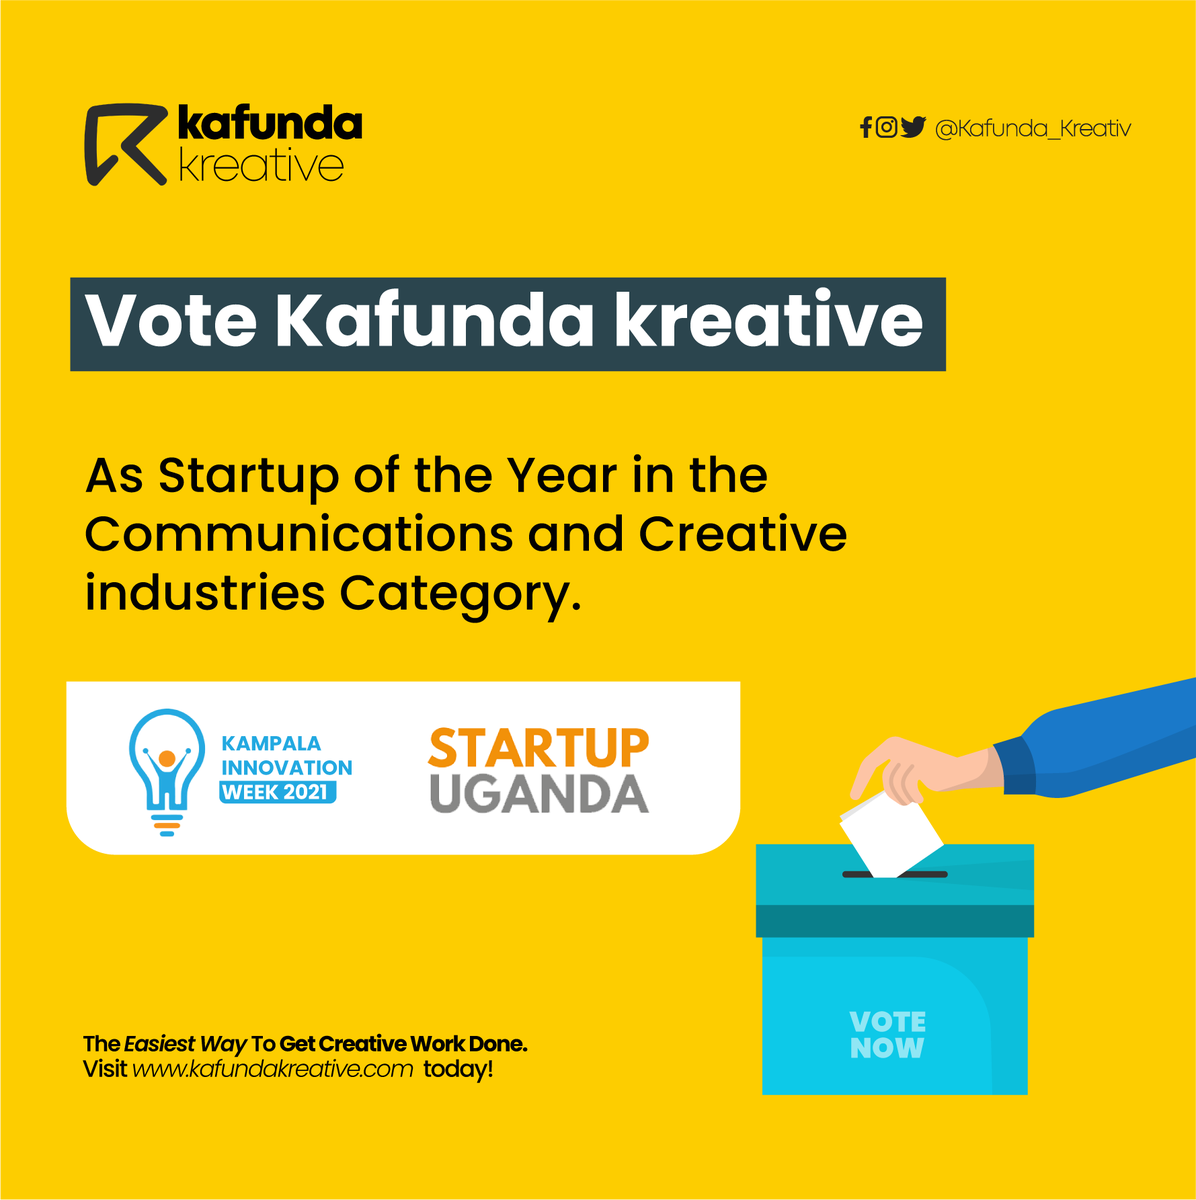 WE ARE NOMINATED!! Head to  bit.ly/SUAWARDSVoting to vote us  'Startup of the Year in the Communications and Creative industries. #Startupoftheyear #Communication #Creativeindustries #vote #gigeconomy #freelancer #remotework #nominated